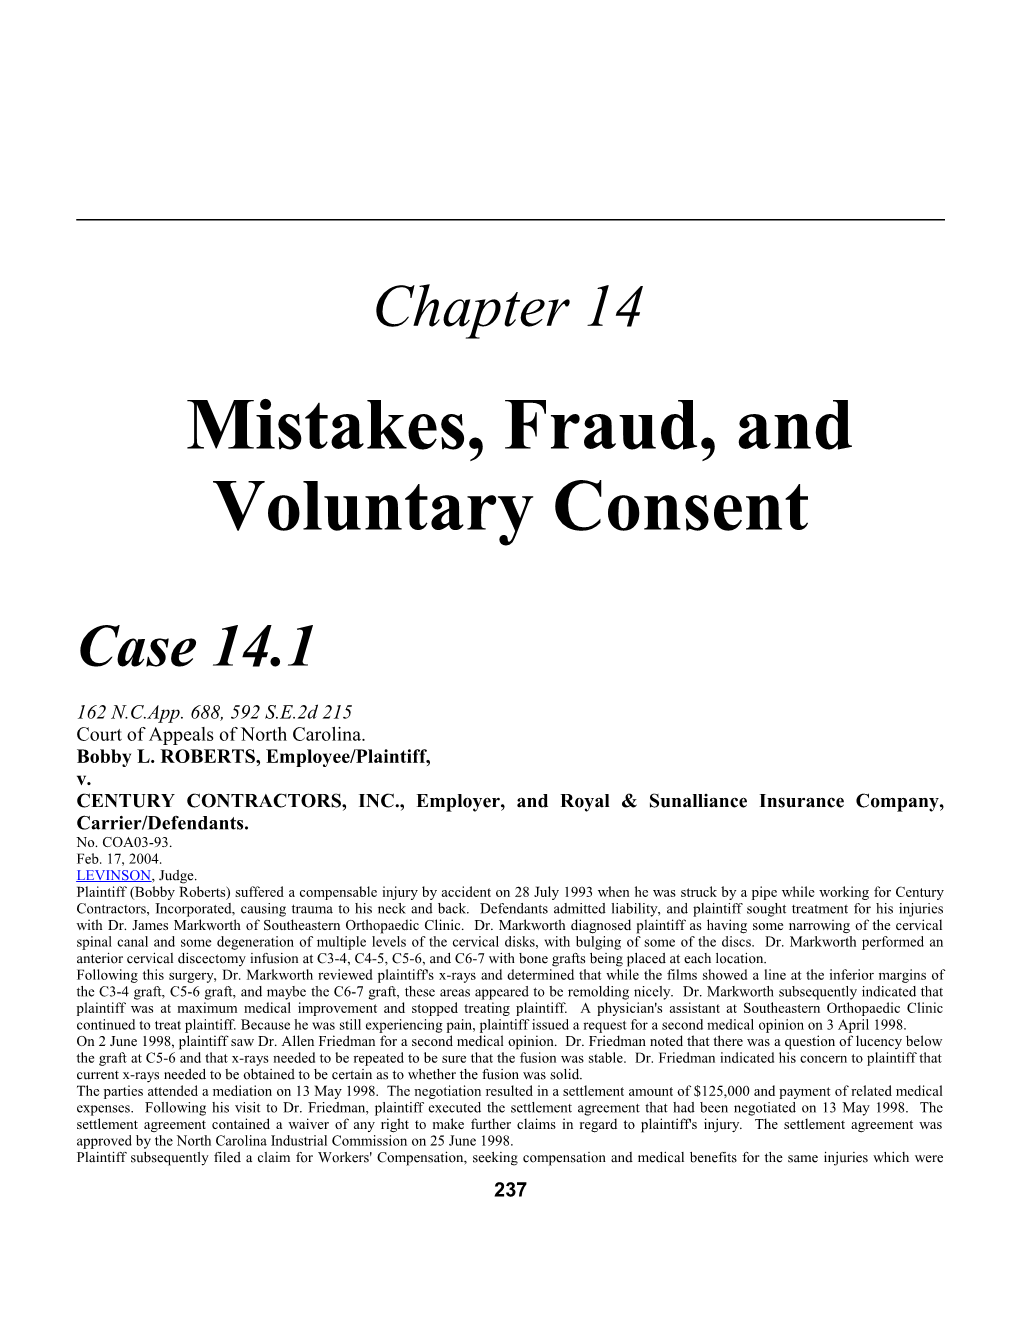 Chapter 14: Mistakes, Fraud, and Voluntary Consent 1